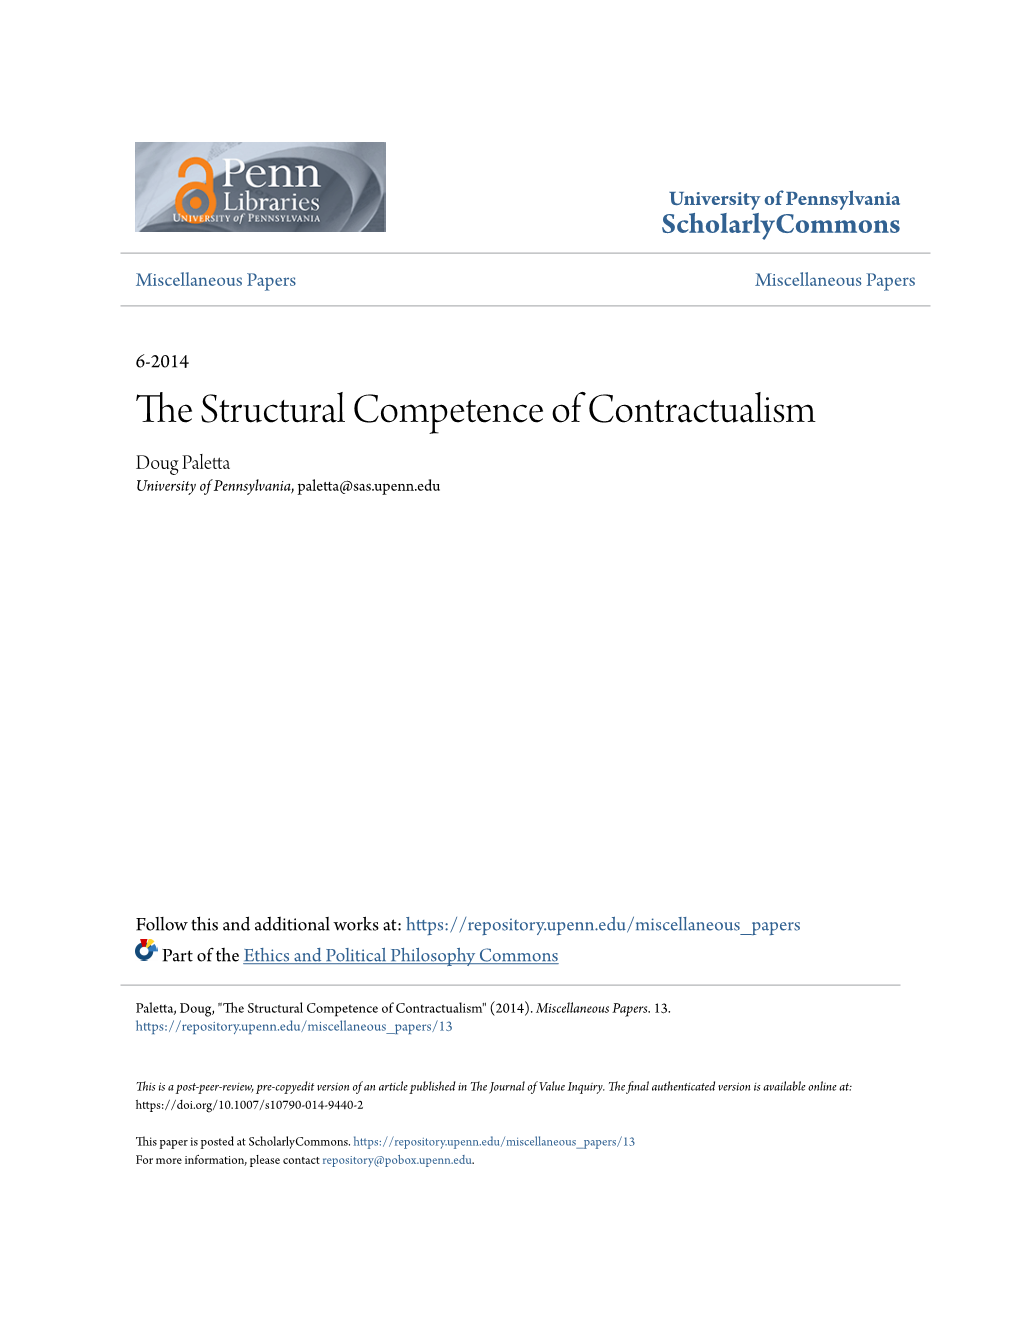 The Structural Competence of Contractualism1 Contractualists Characterize Morality As Fundamentally Concerning How People Relate to One Another